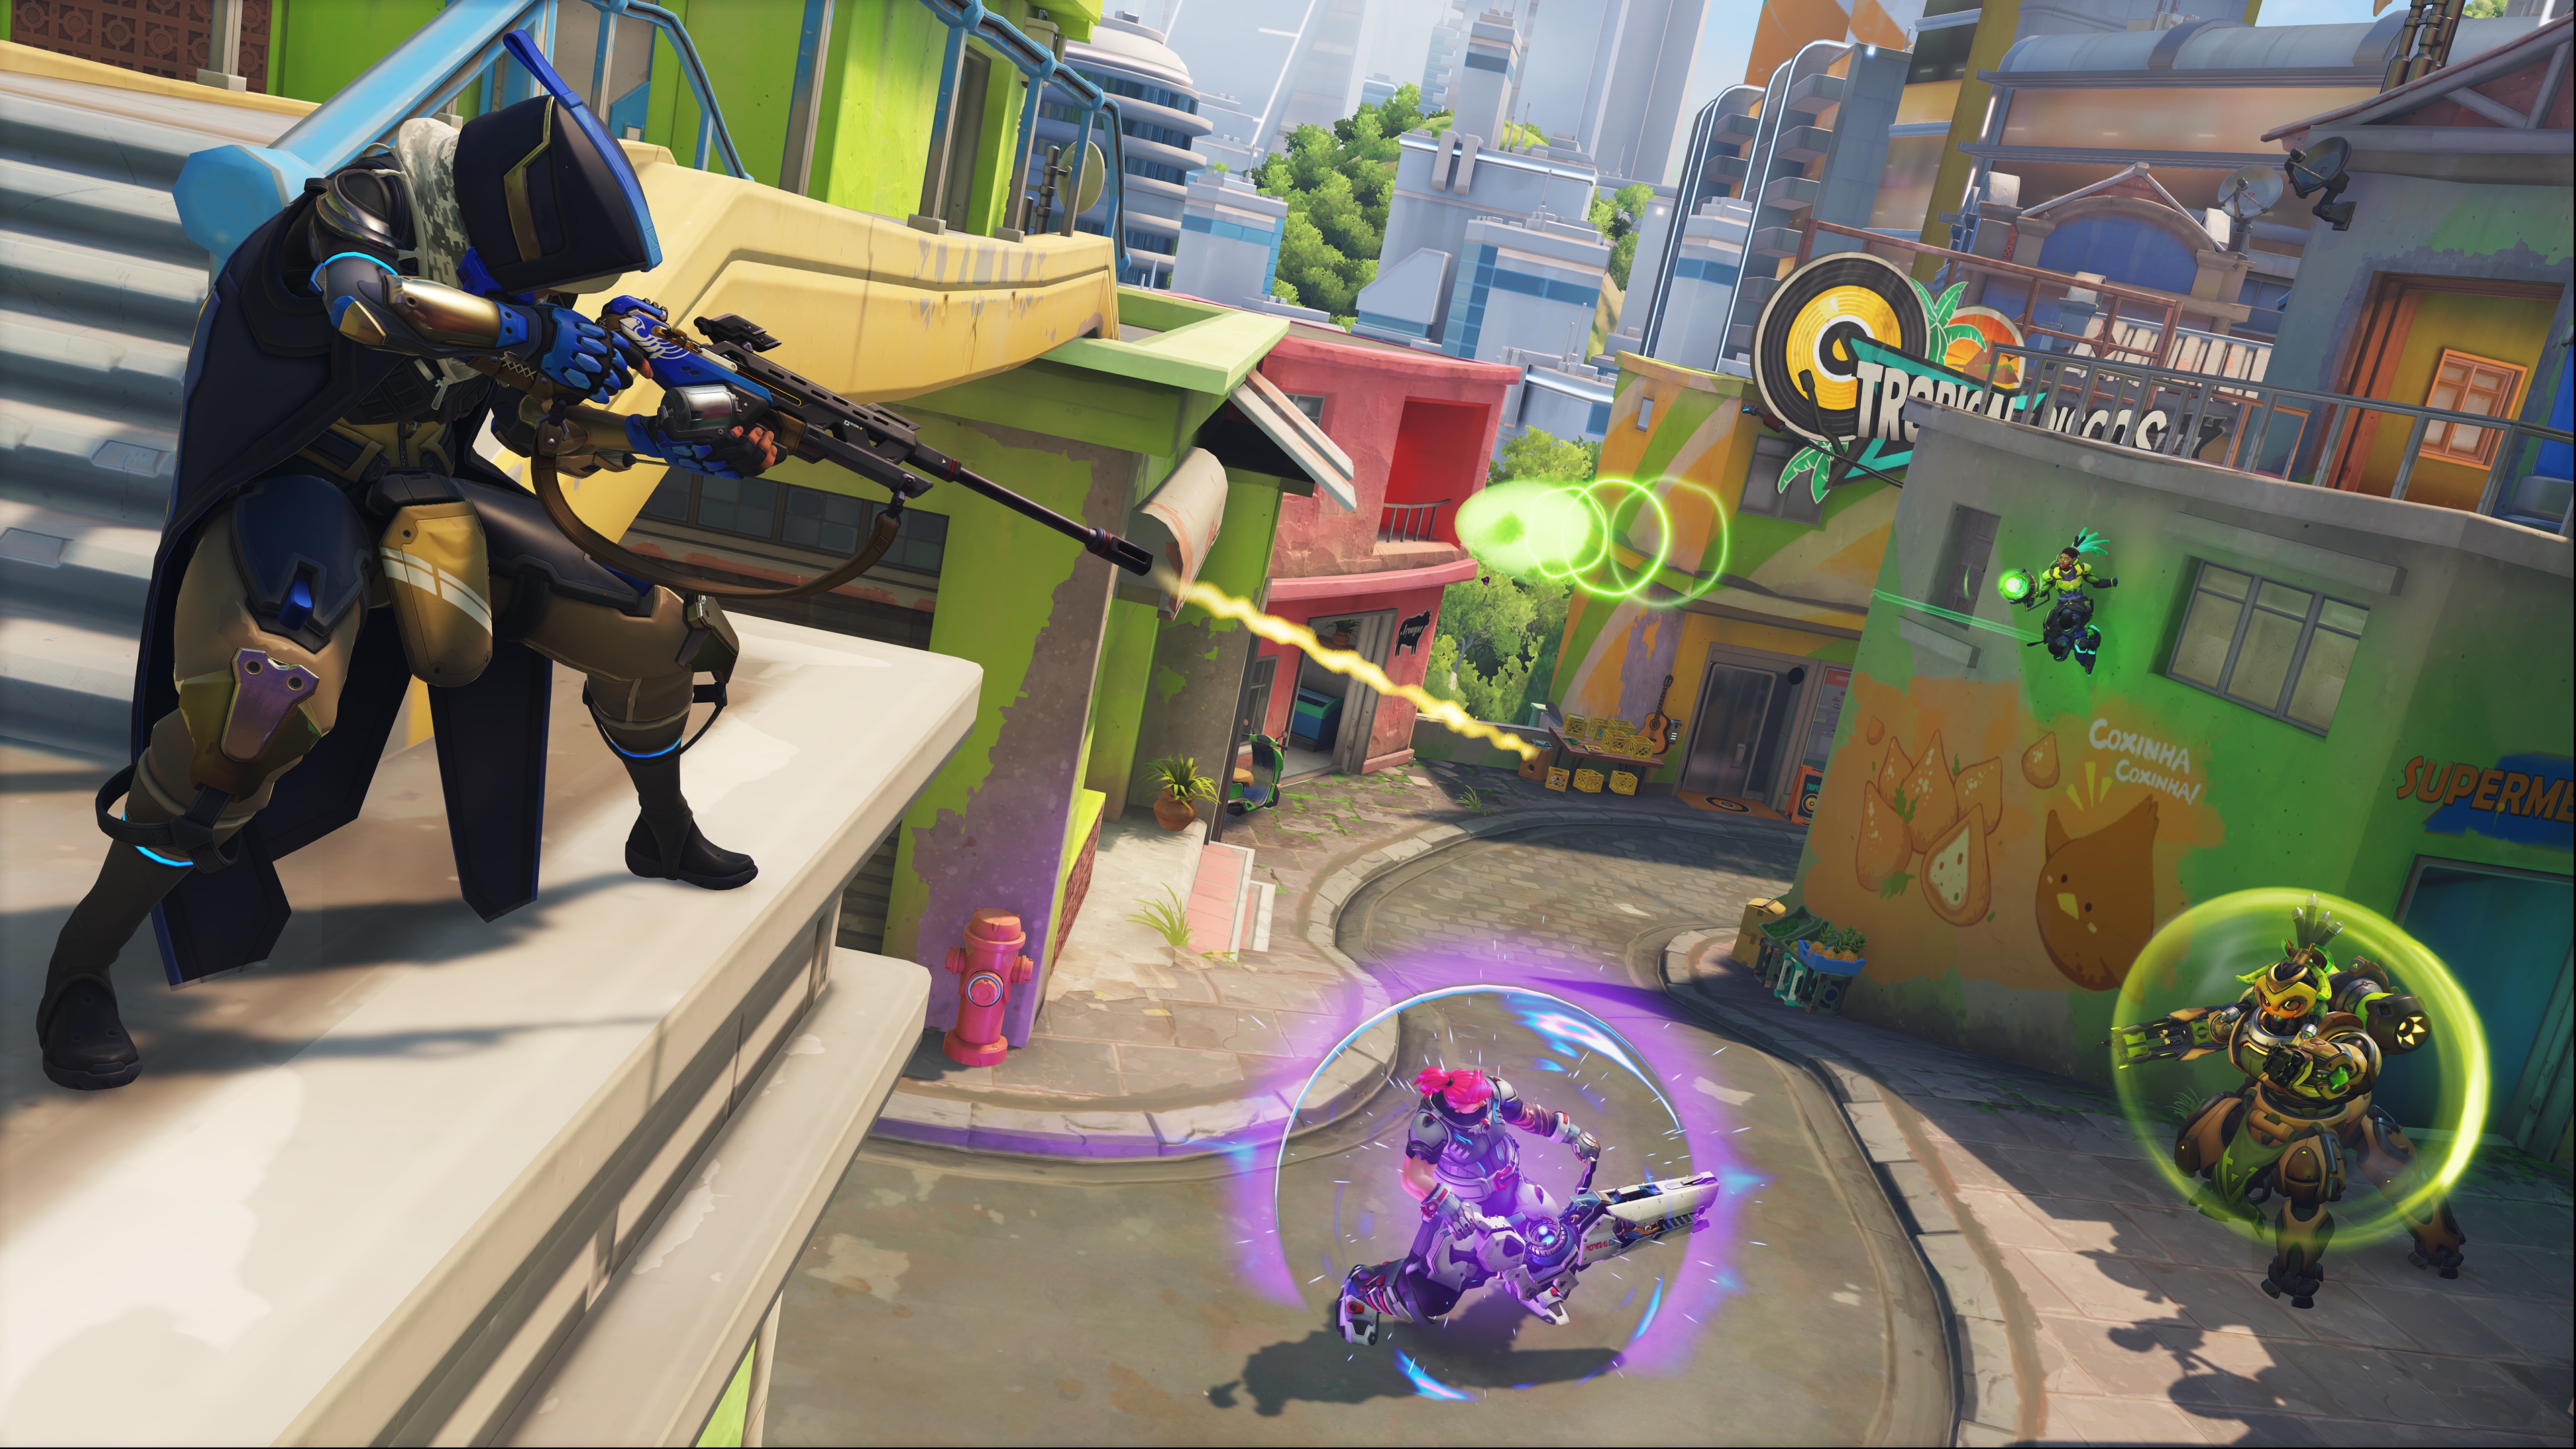 Initializing systems! Updating Competitive play for Overwatch 2